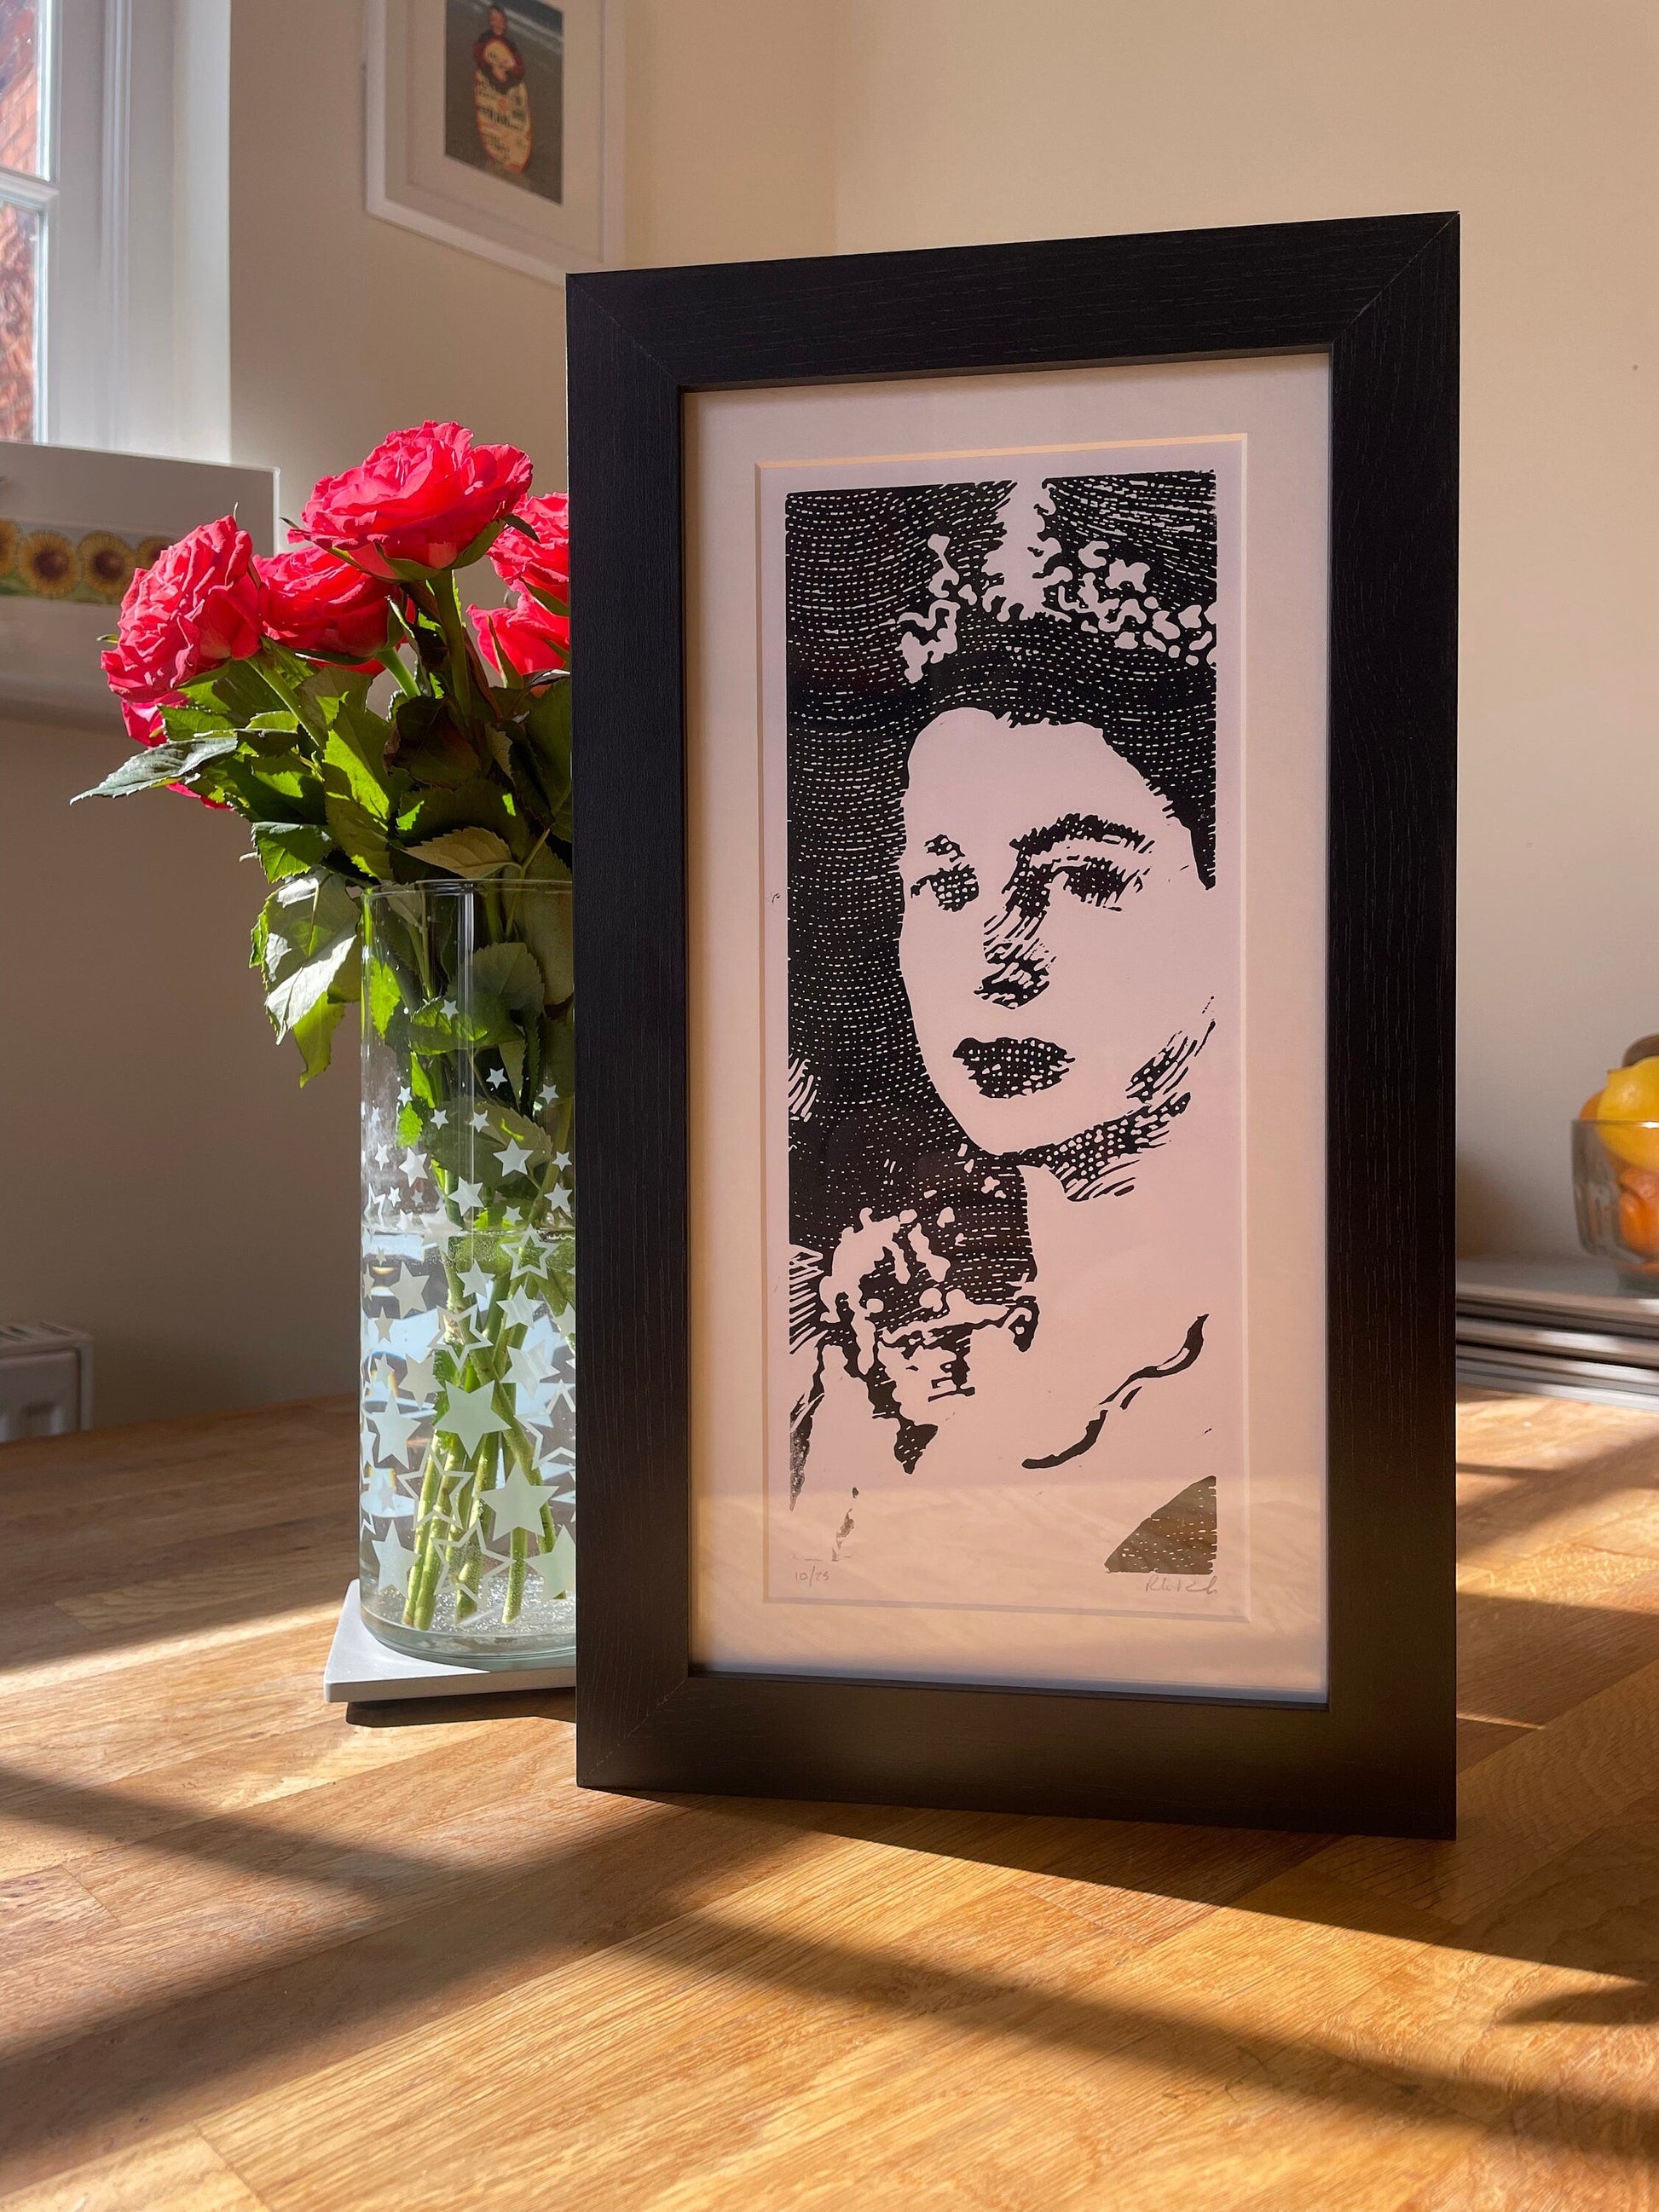 The Queen. Limited Edition Linocut Print by The Rik Barwick Studio